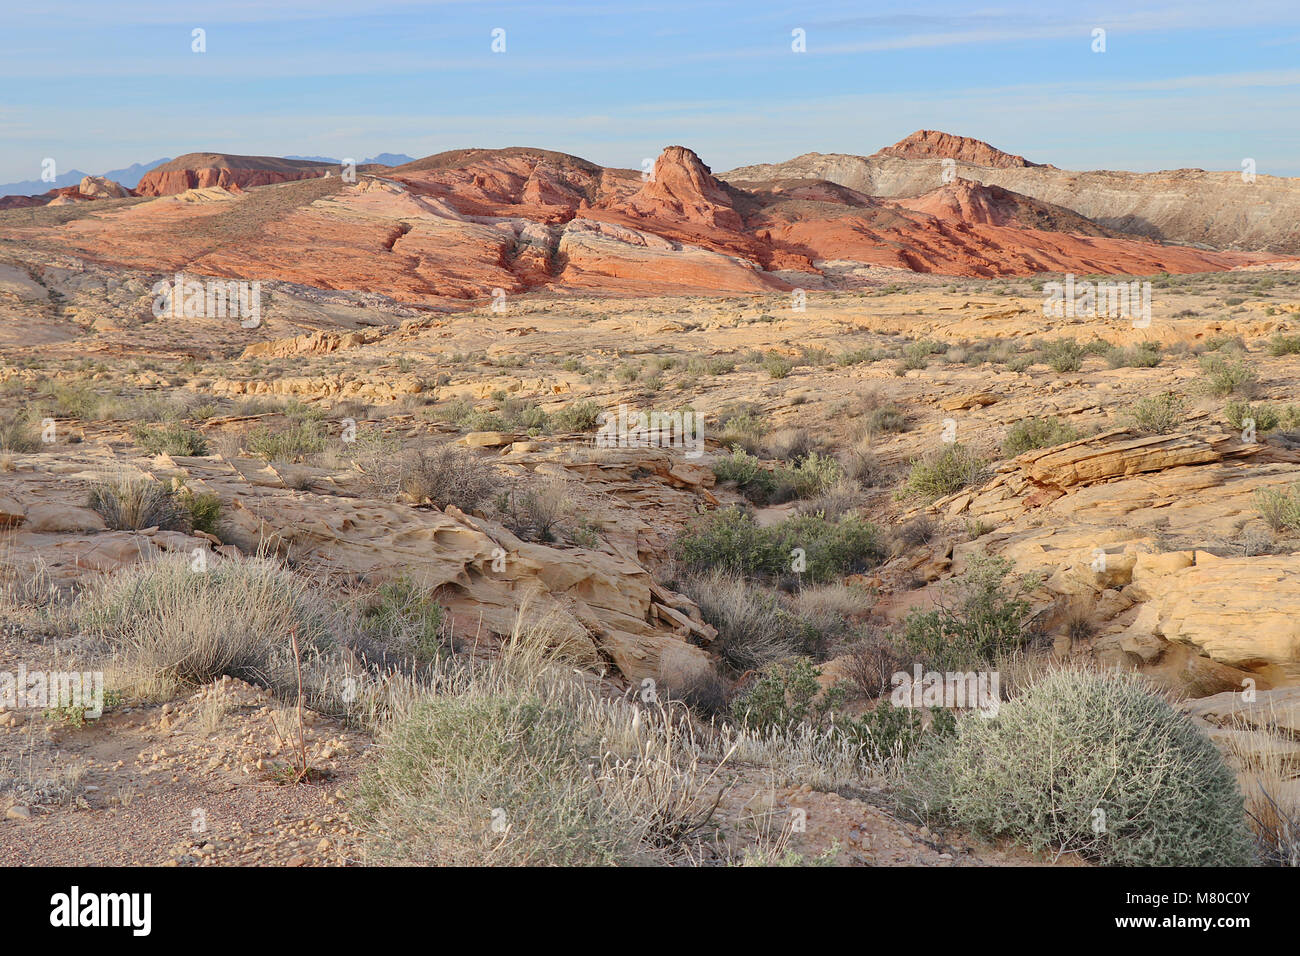 Ancient red rock formations in the Valley of Fire State Park in the desert outside Las Vegas, Nevada. Stock Photo